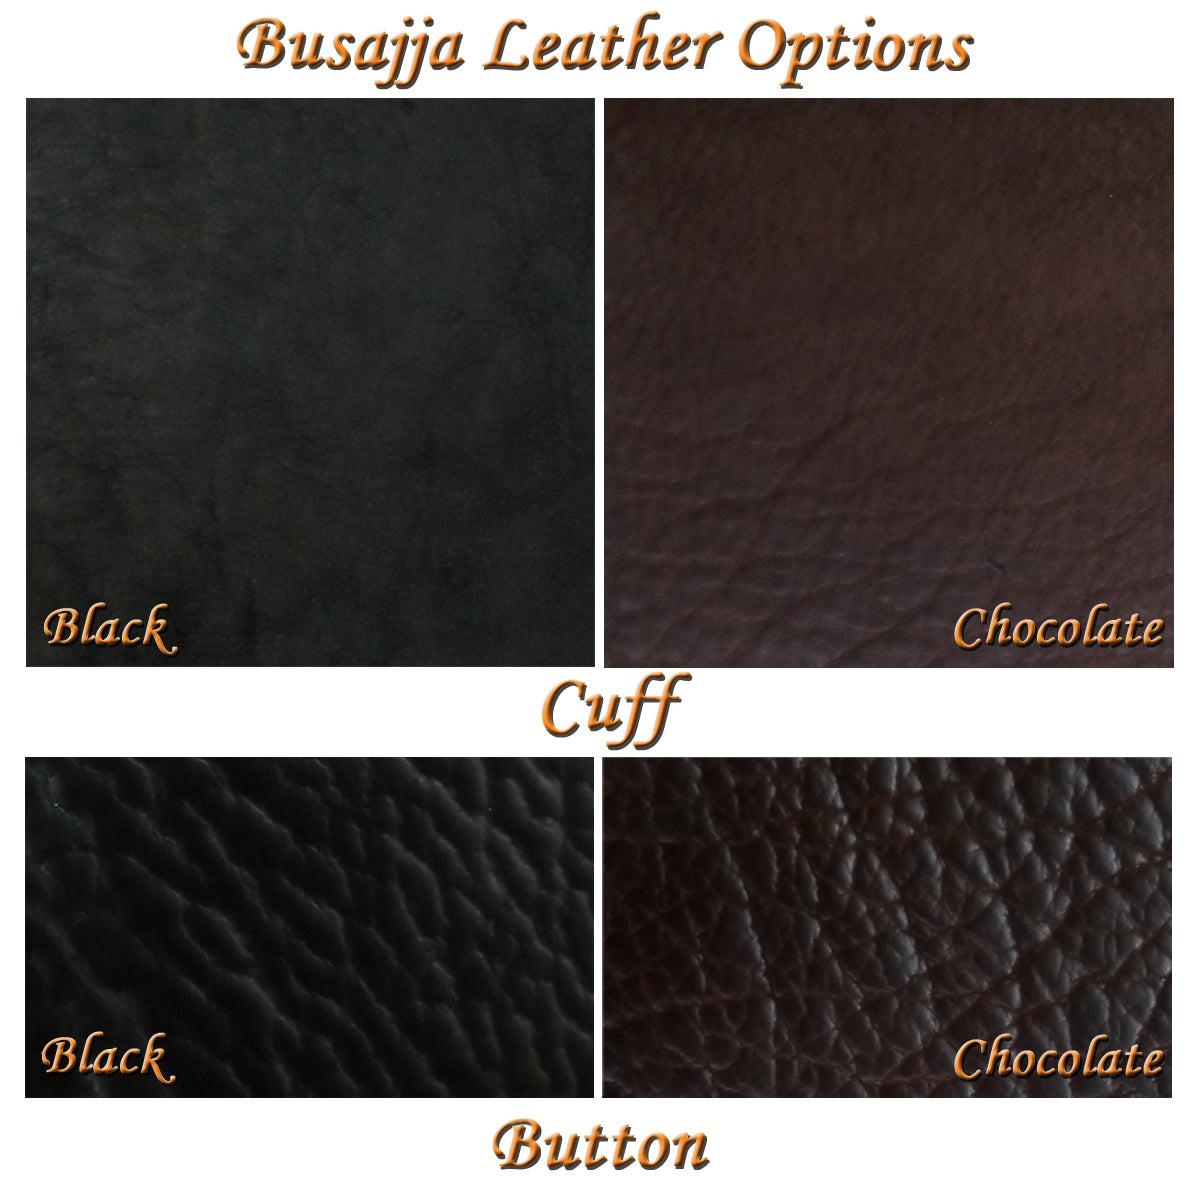 Busajja Leather Wrap Cuff Bison Leather Color Choices